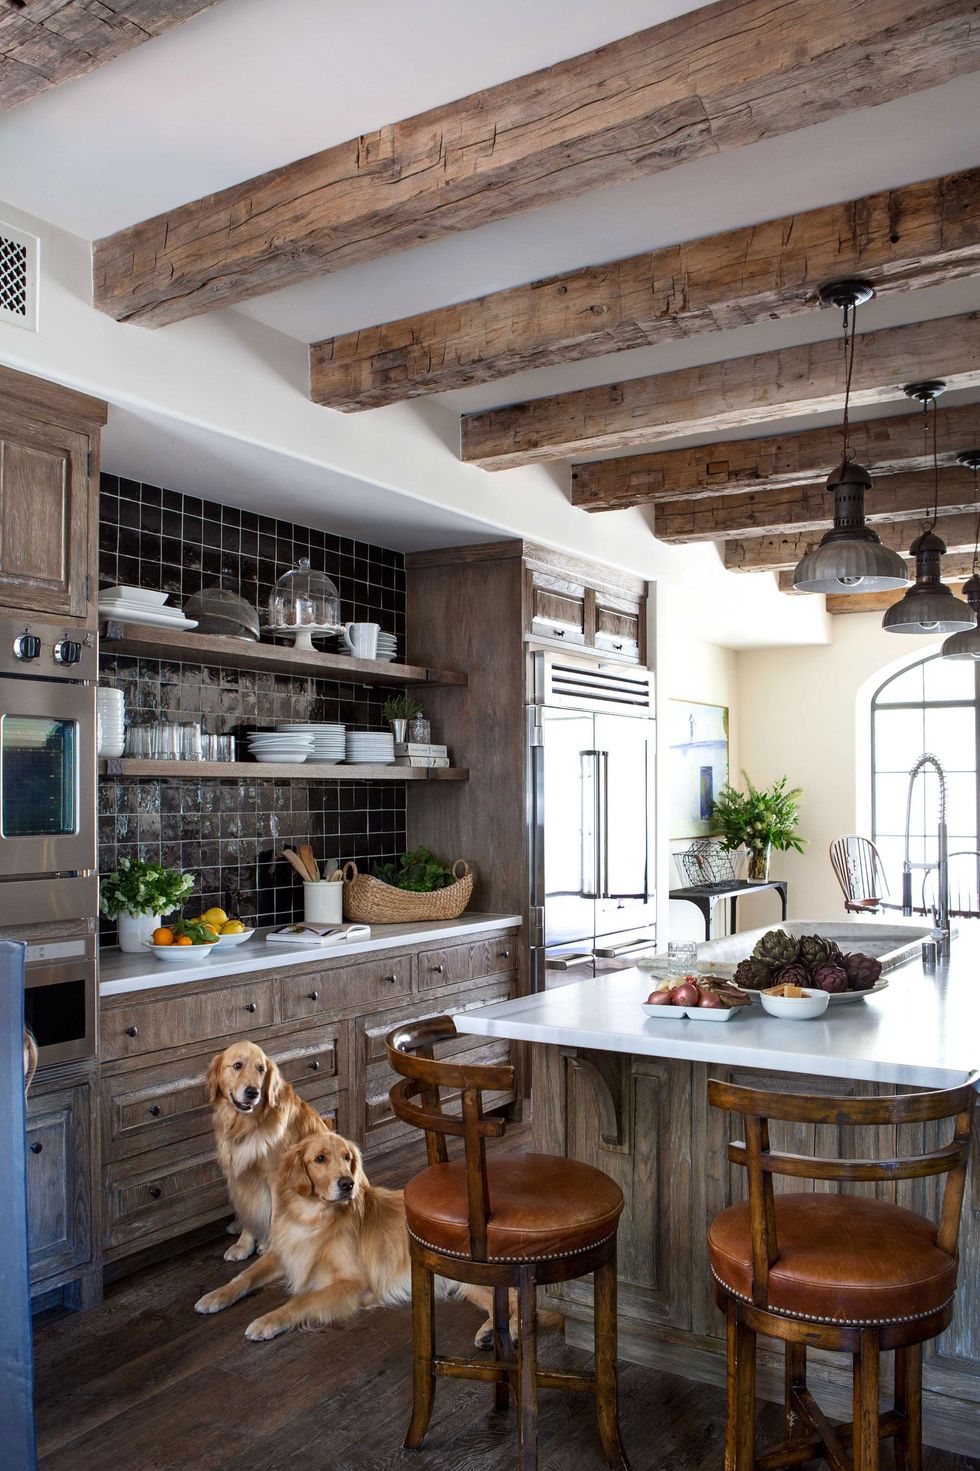 https://hips.hearstapps.com/hmg-prod/images/rustic-kitchen-dogs-1517251288.jpg?crop=0.943xw:0.944xh;0,0&resize=980:*